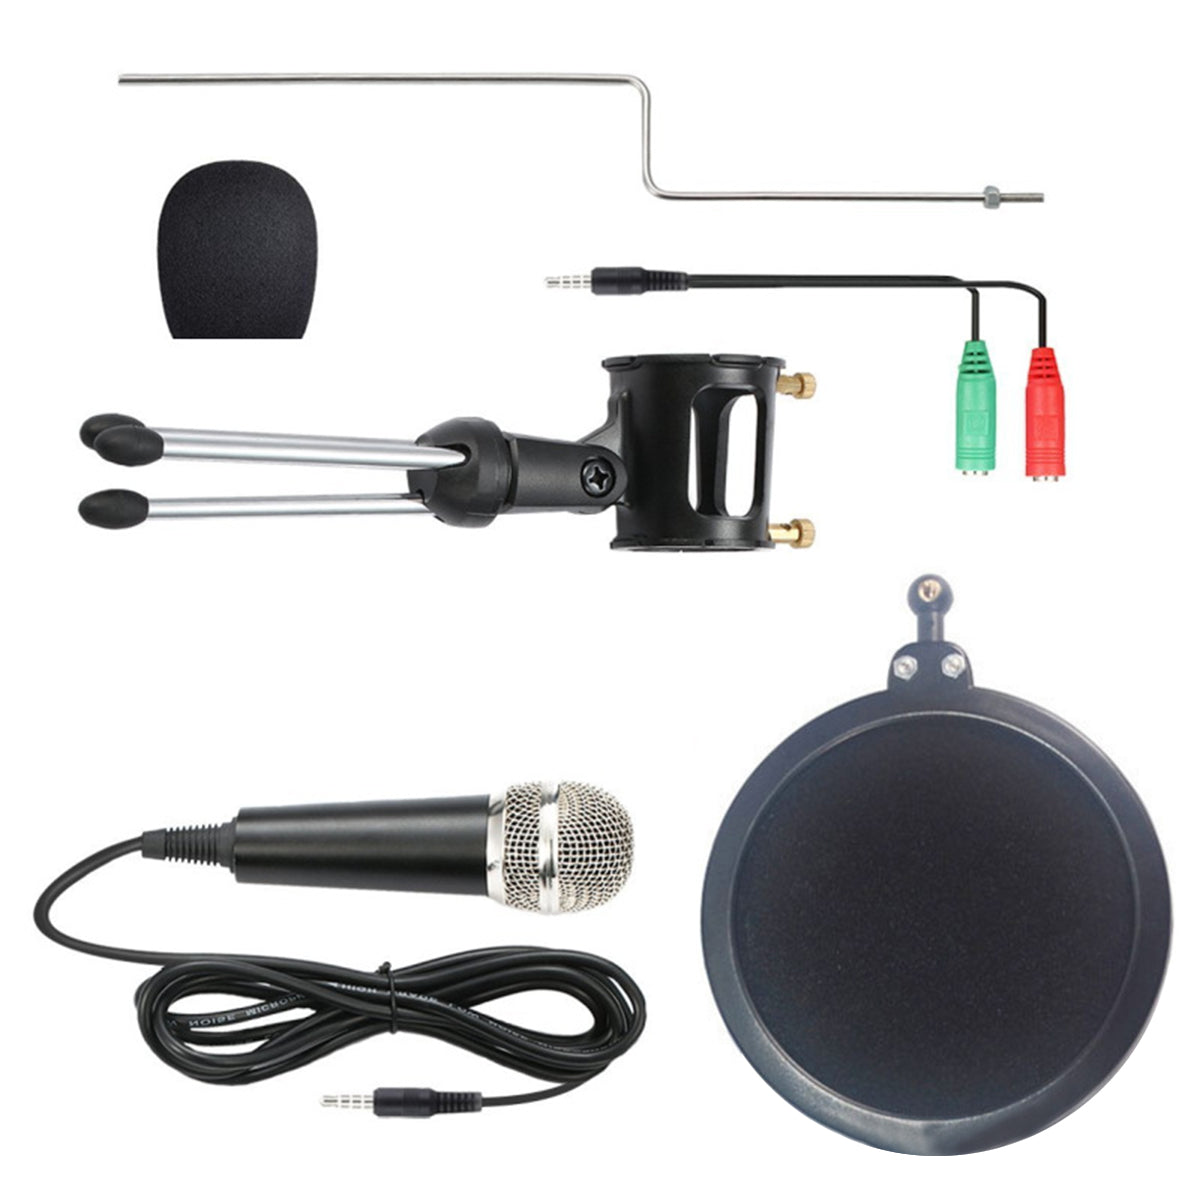 Bakeey Studio Condenser Microphone Set Recording Broadcasting Mic With Stand For PC Phone Karaoke